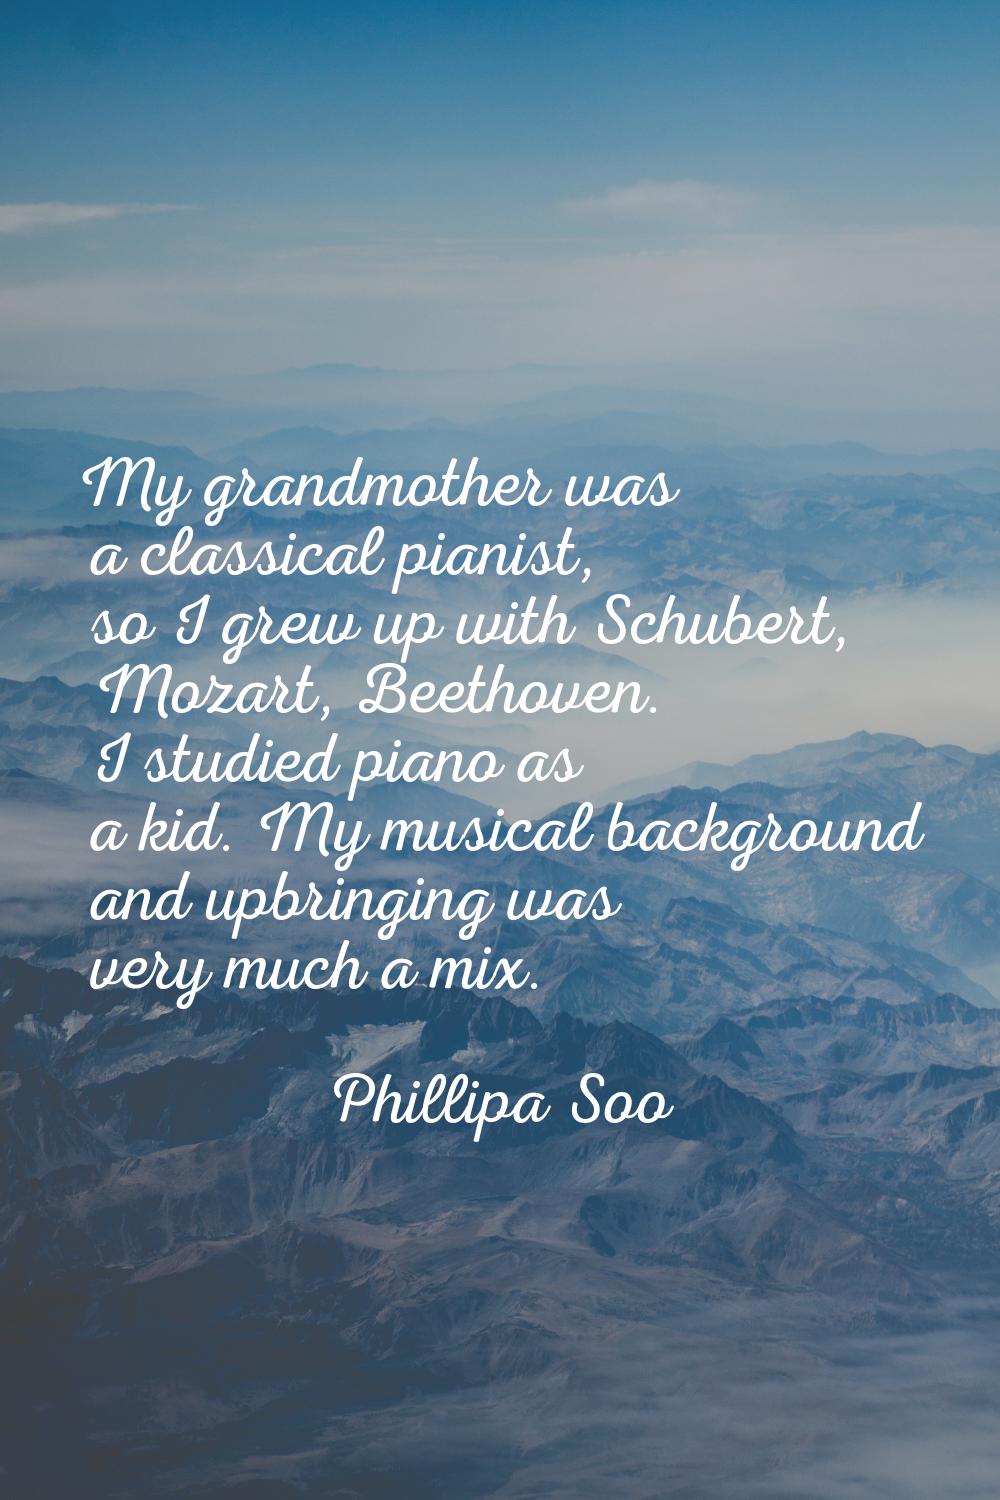 My grandmother was a classical pianist, so I grew up with Schubert, Mozart, Beethoven. I studied pi